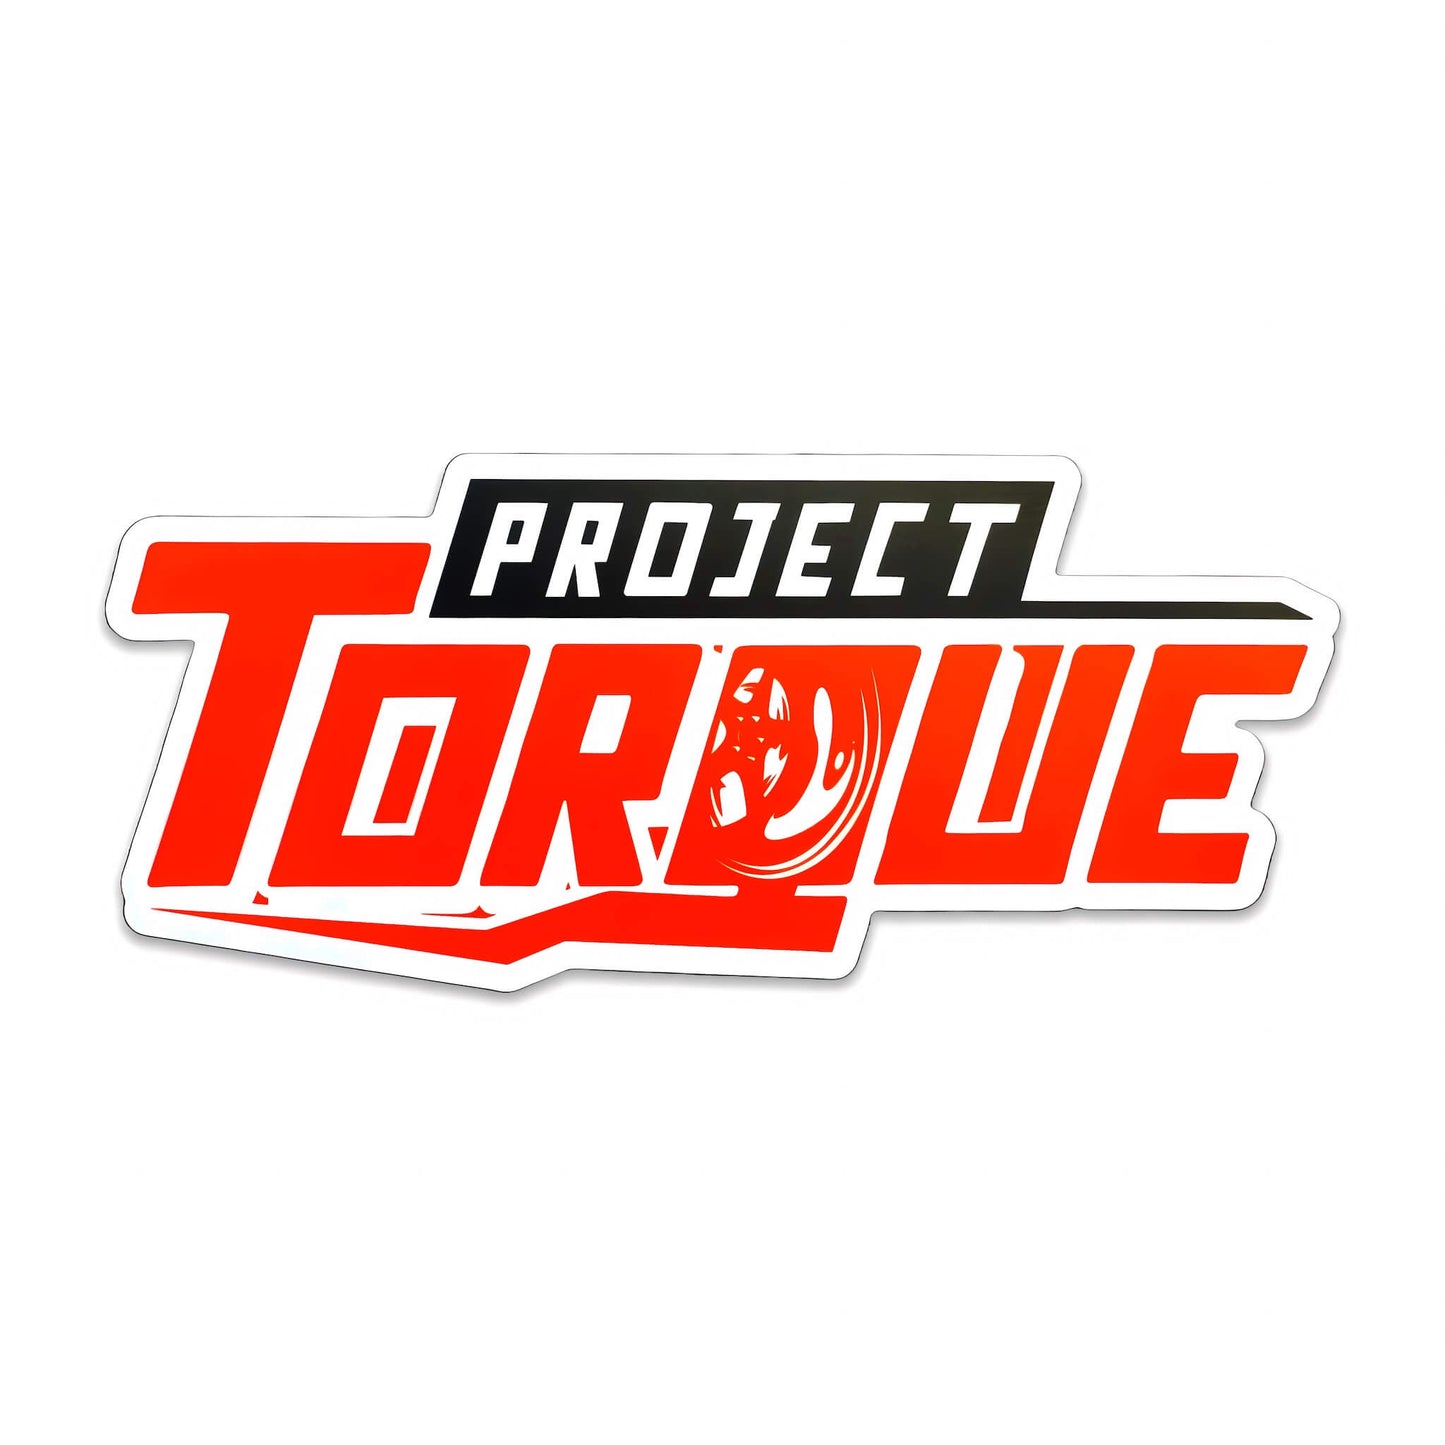 RED PROJECT TORQUE DECAL